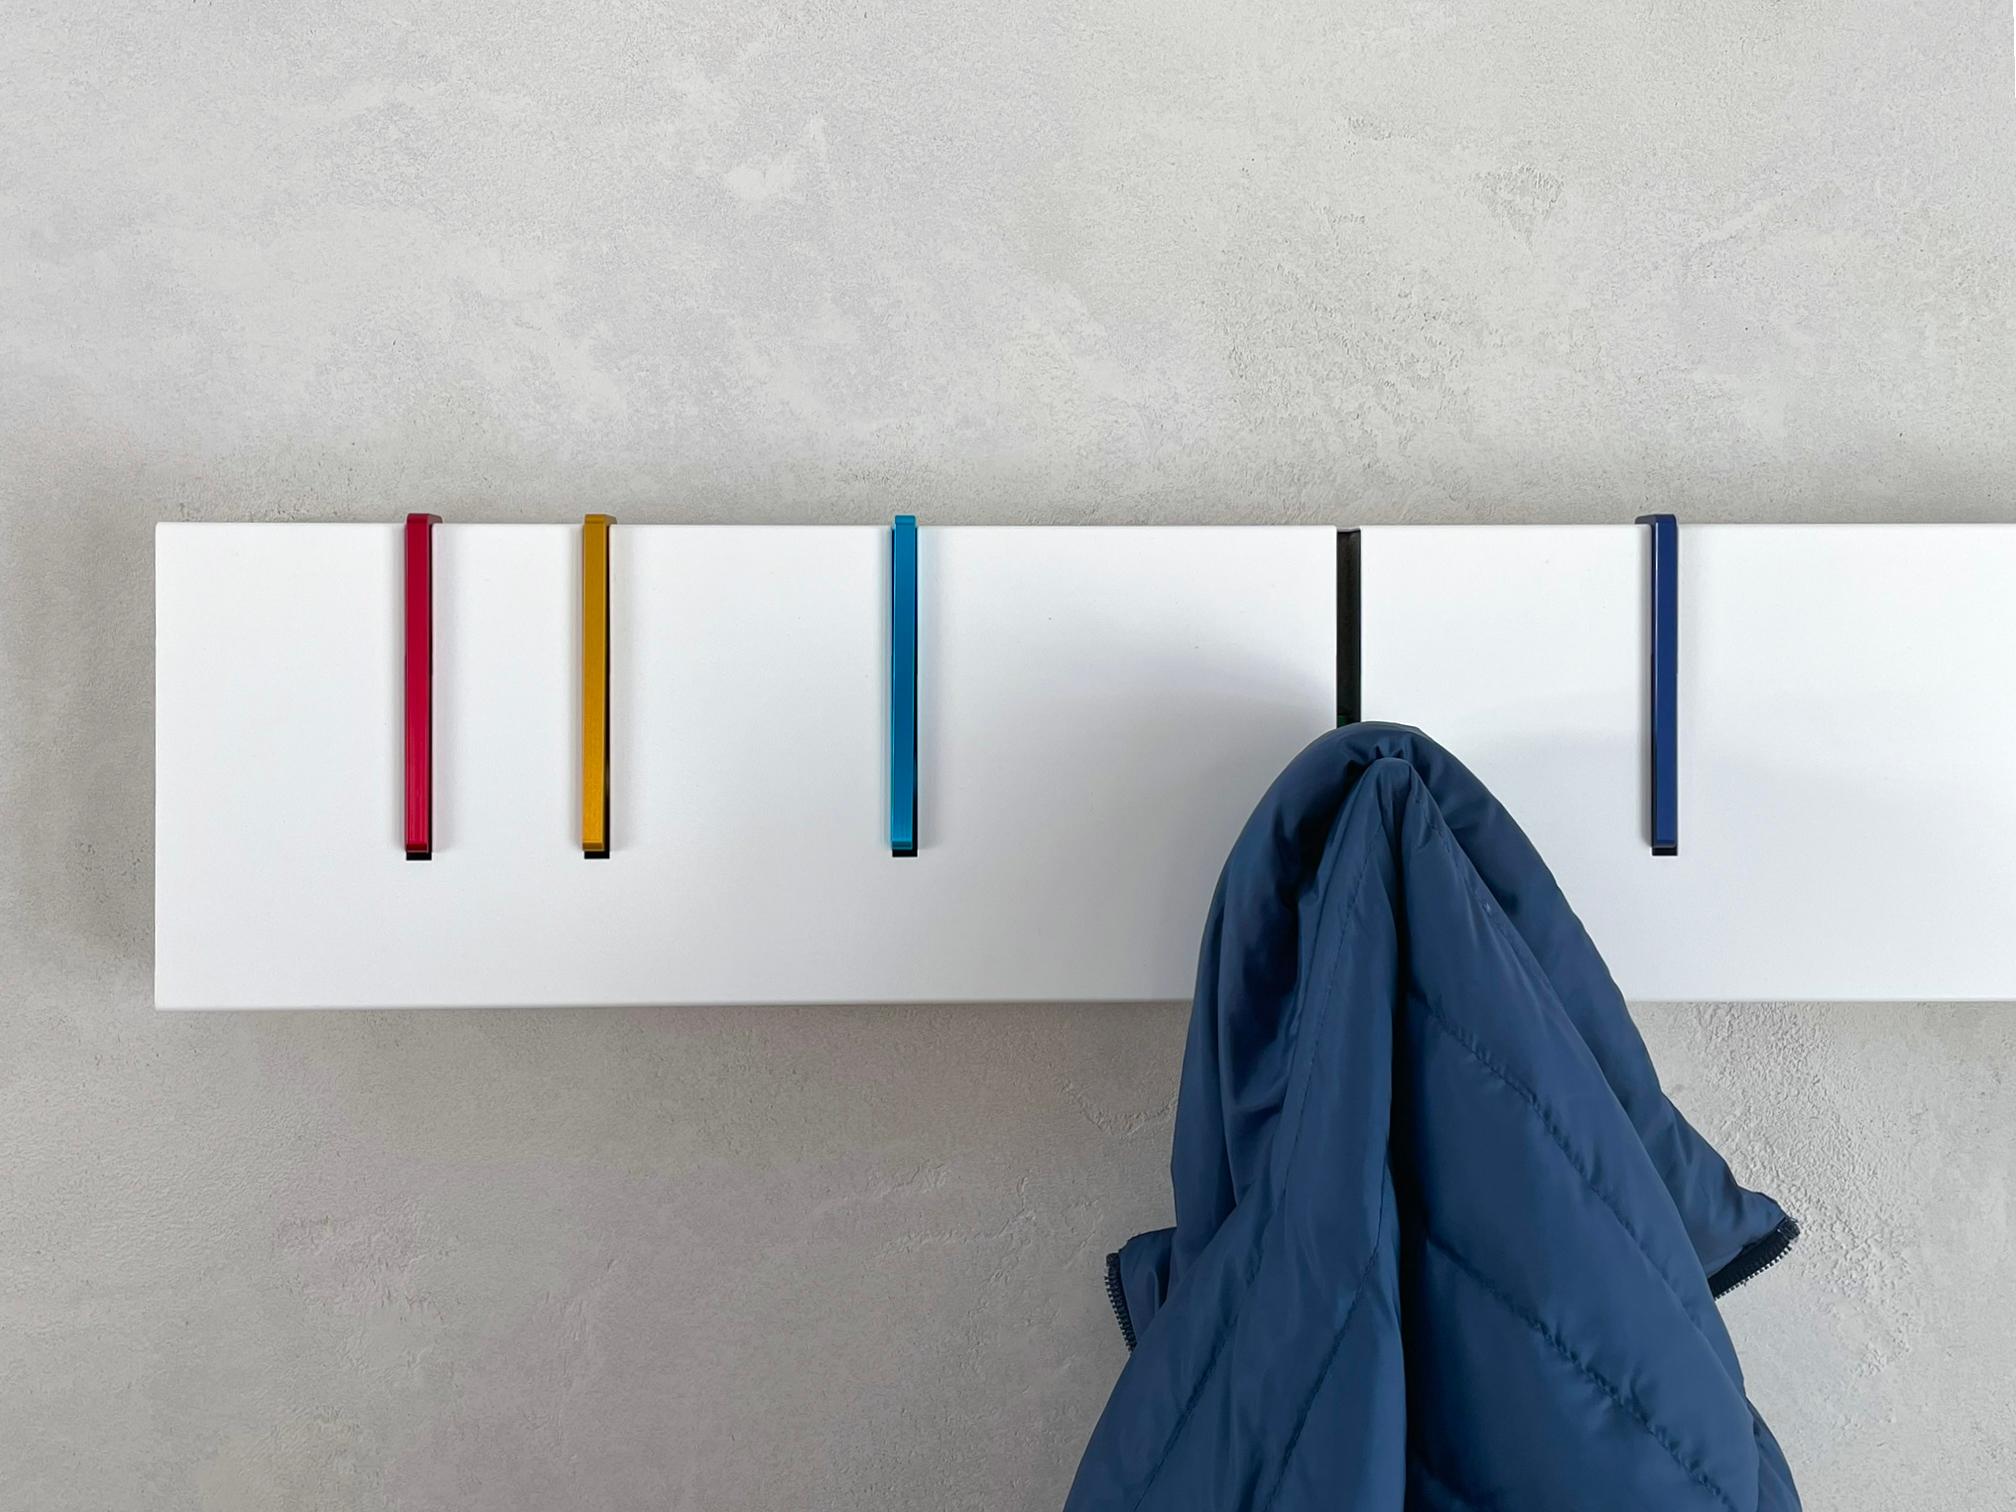 The iconic coat rack that functions as both a practical storage solution and modern sculptural object. When not in use as a coat rack, the Symbol hangs on the wall as a purely aesthetic piece. When needed, the precision machined metal coat hooks